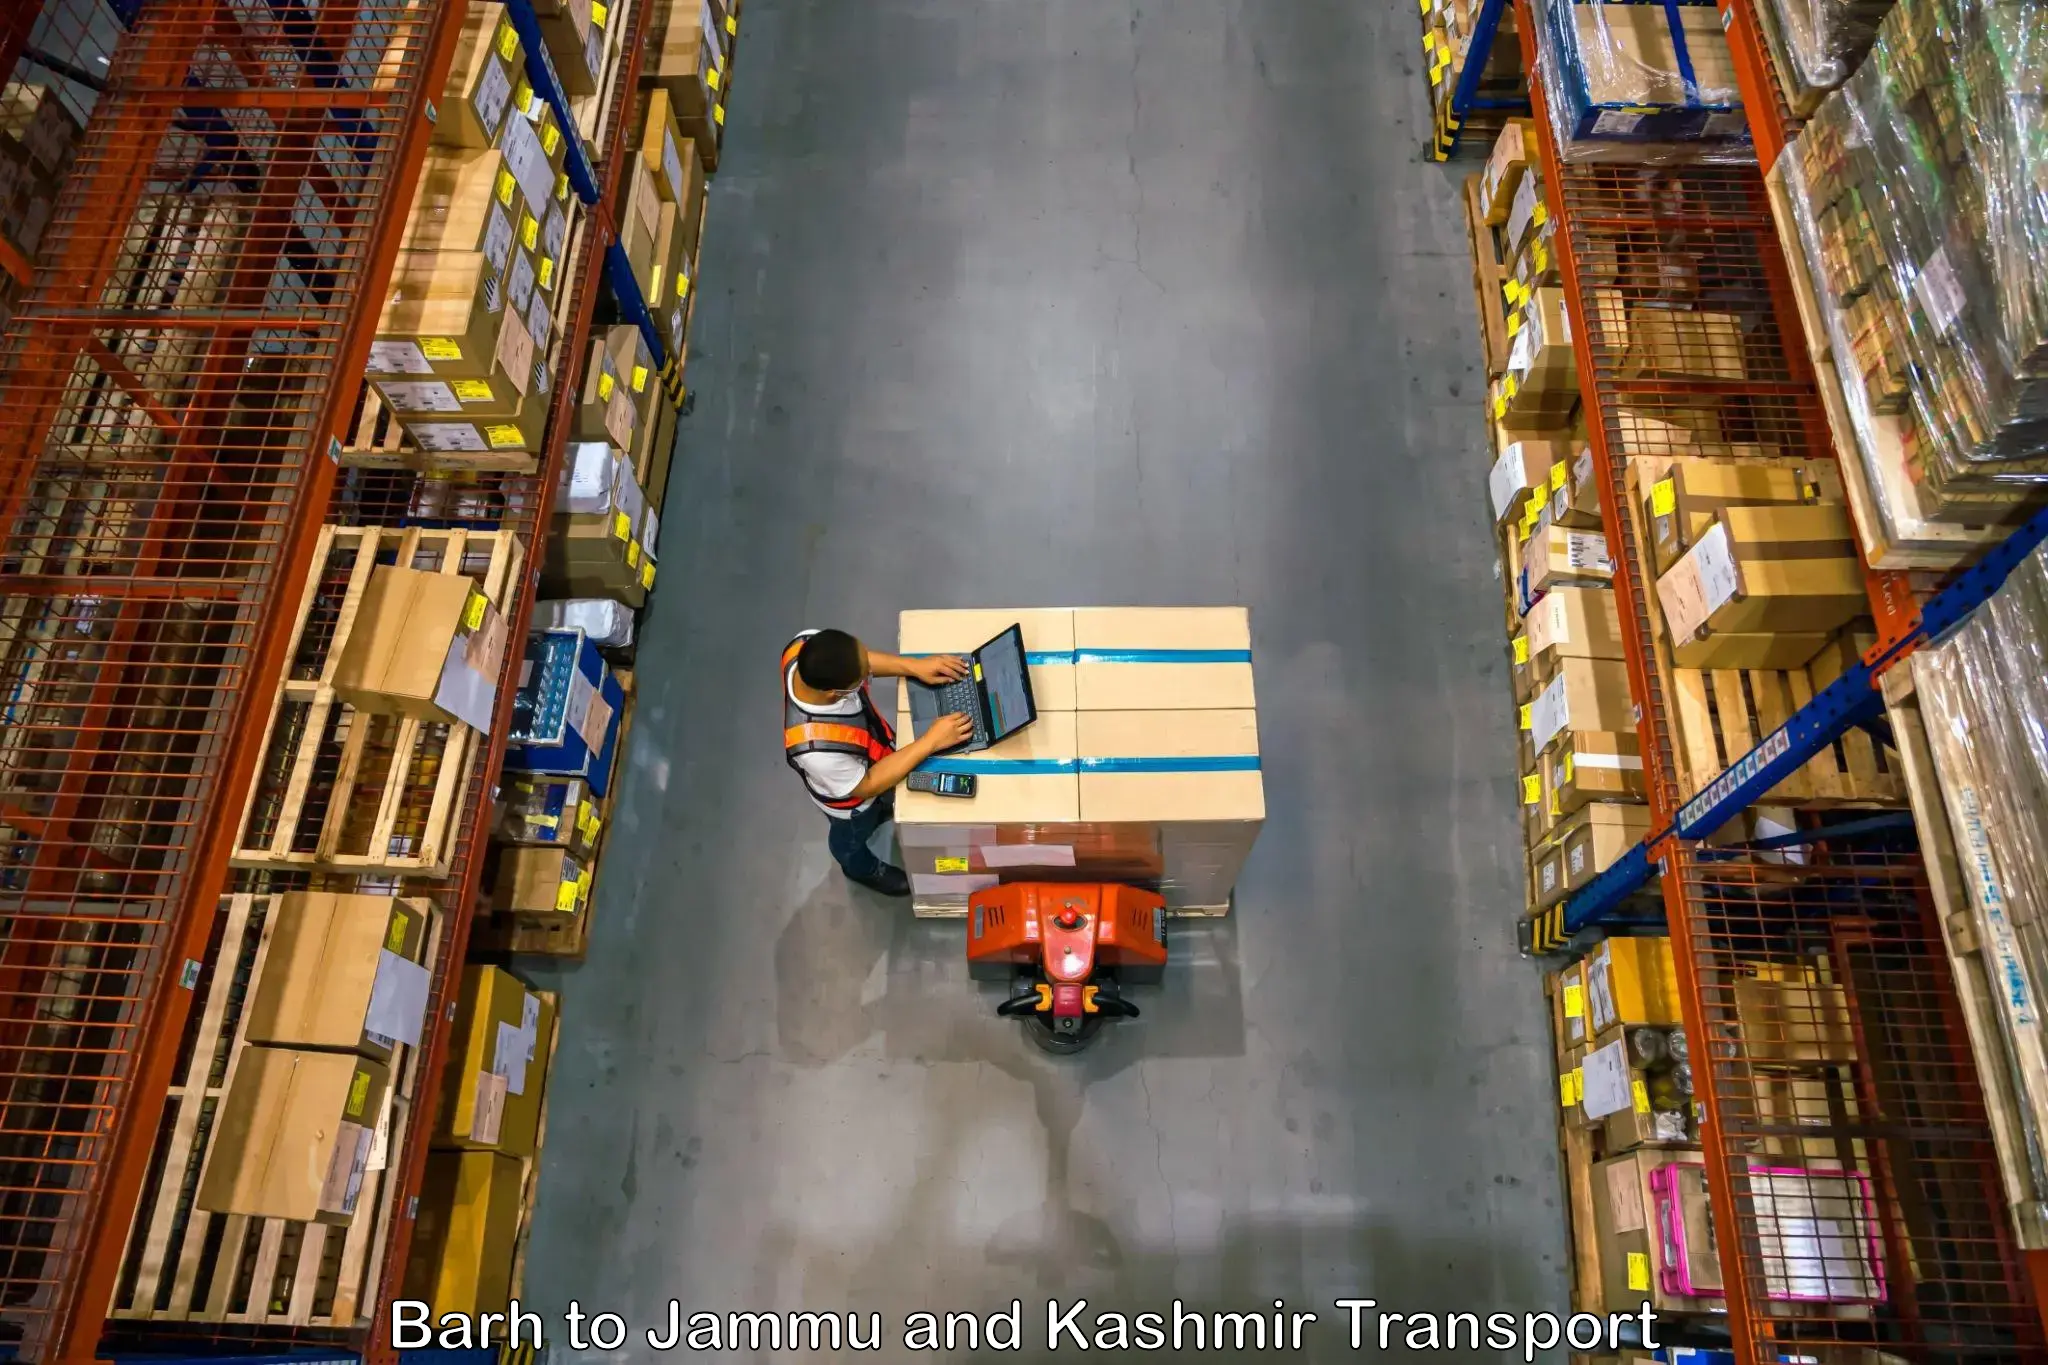 Truck transport companies in India Barh to Jammu and Kashmir